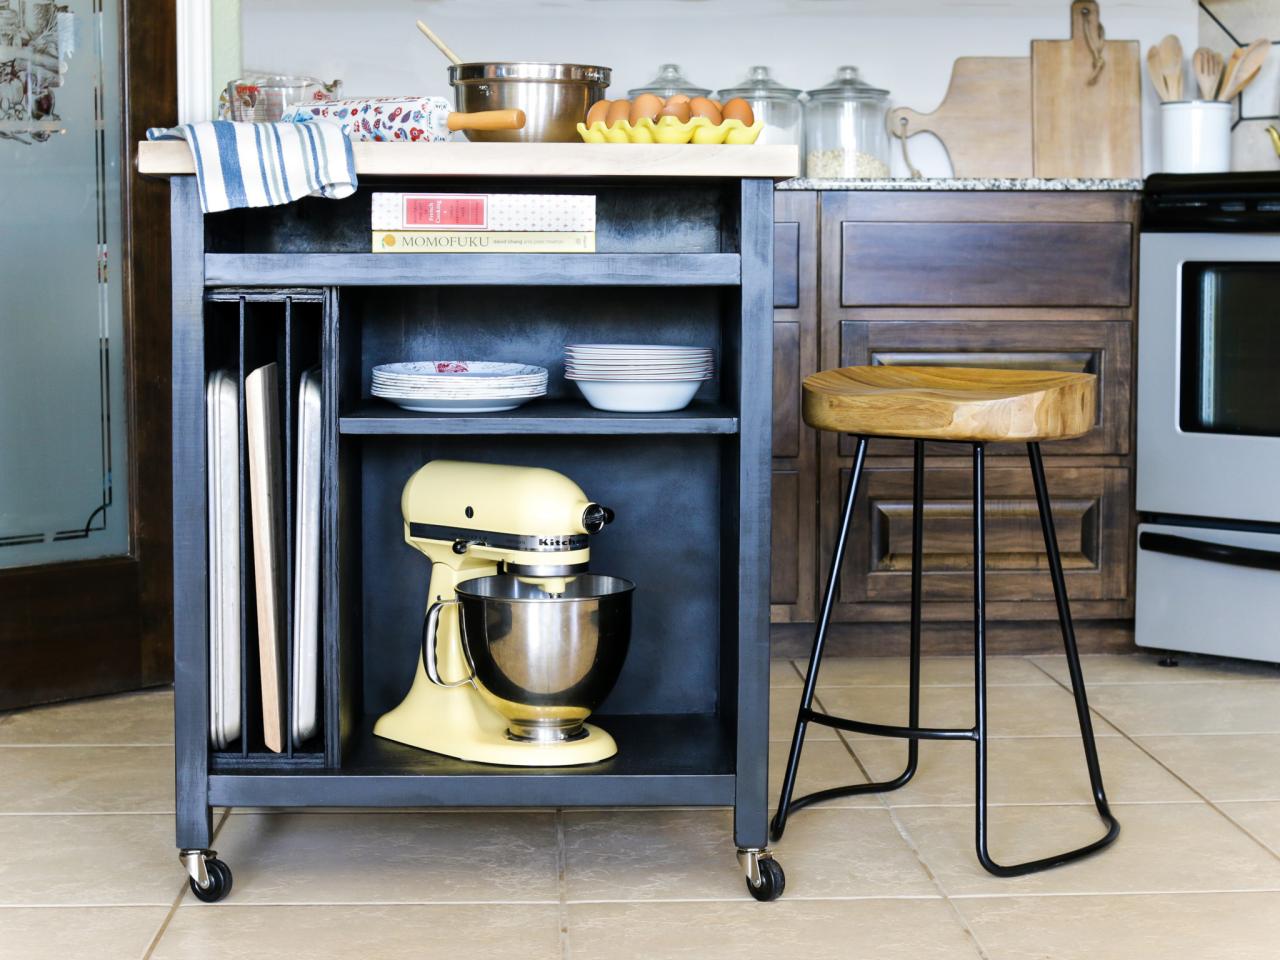 To Build A Diy Kitchen Island On Wheels, Diy Kitchen Island Ideas With Seating